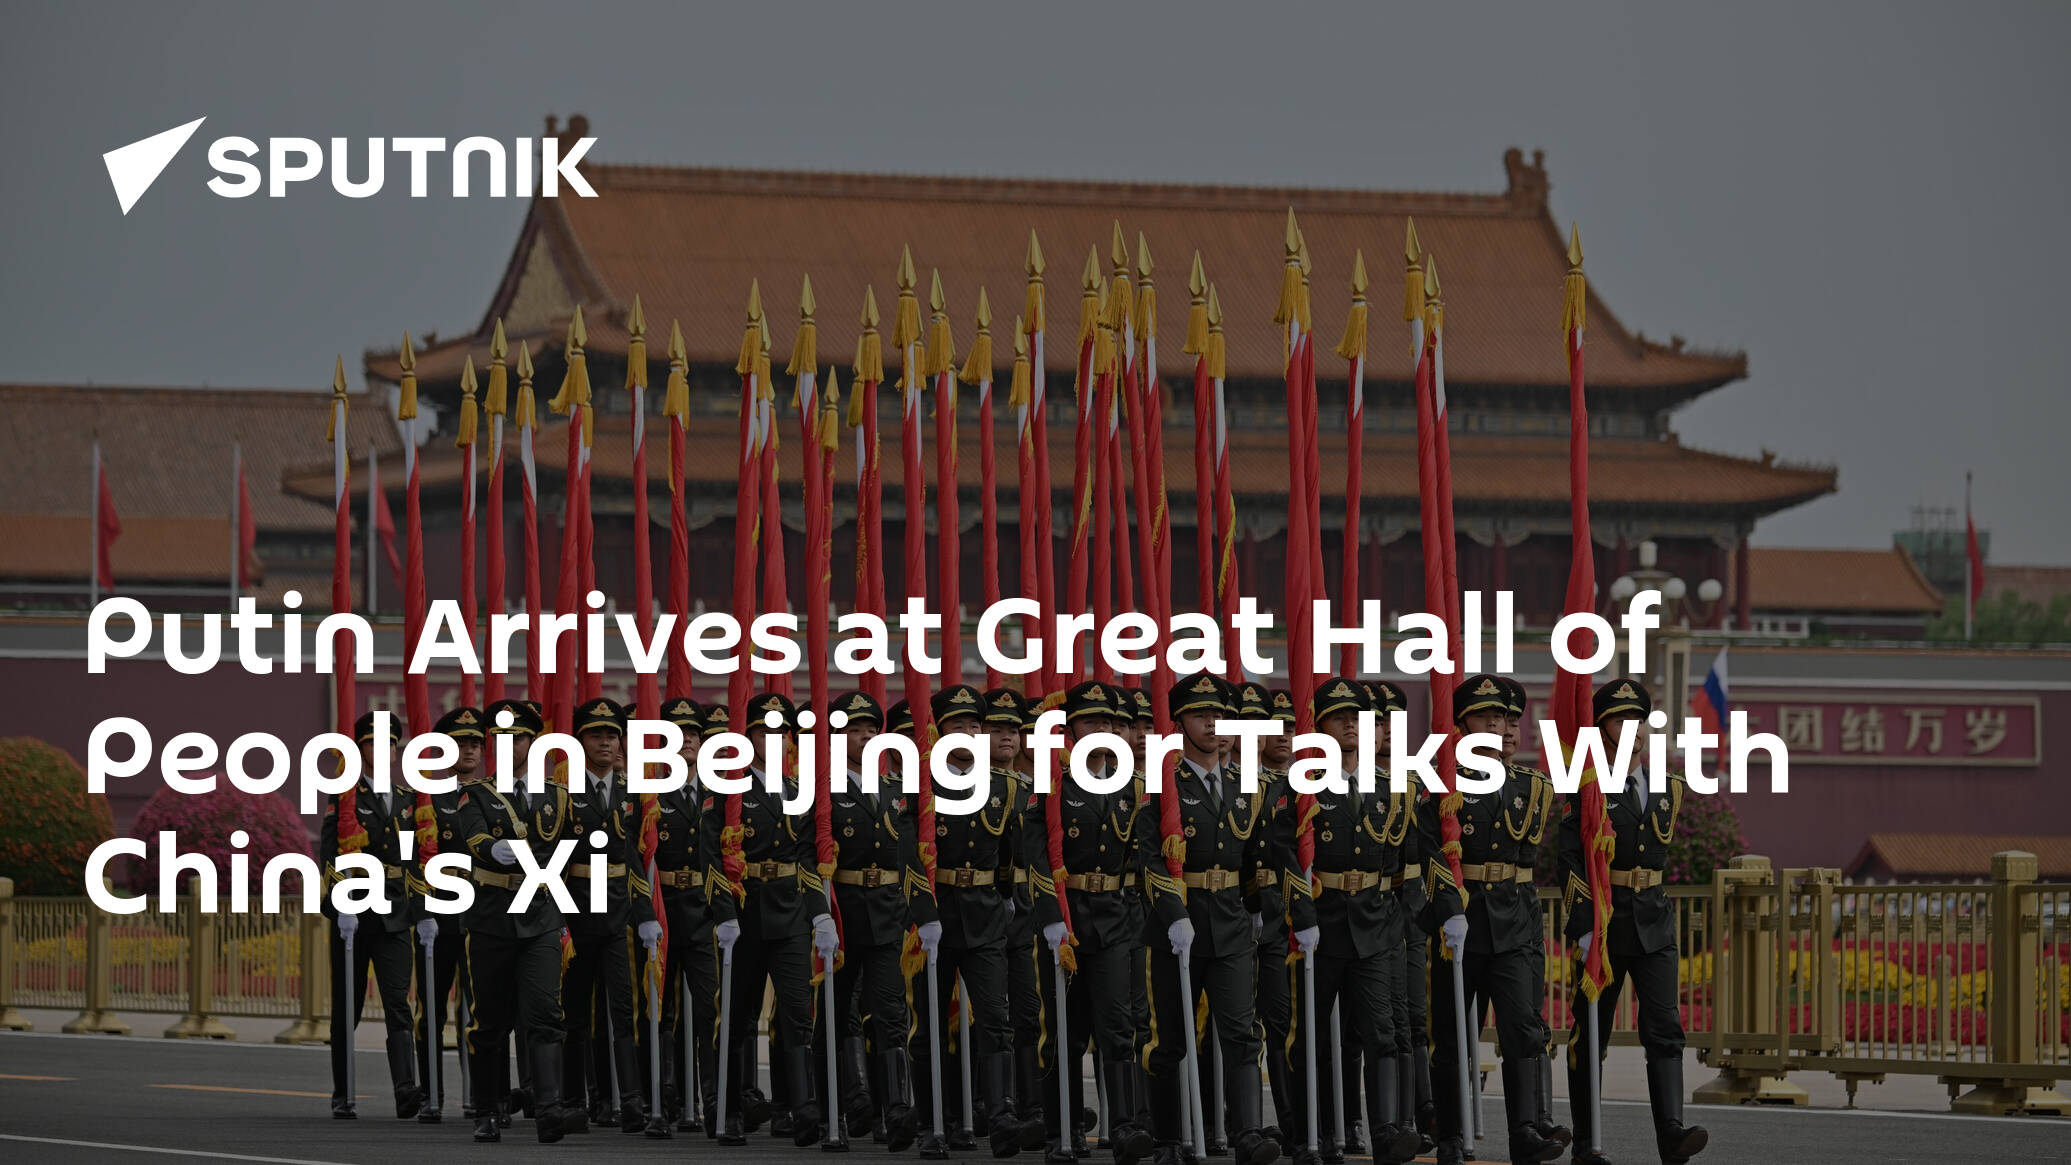 Putin Arrives at Great Hall of People in Beijing for Talks With China's Xi